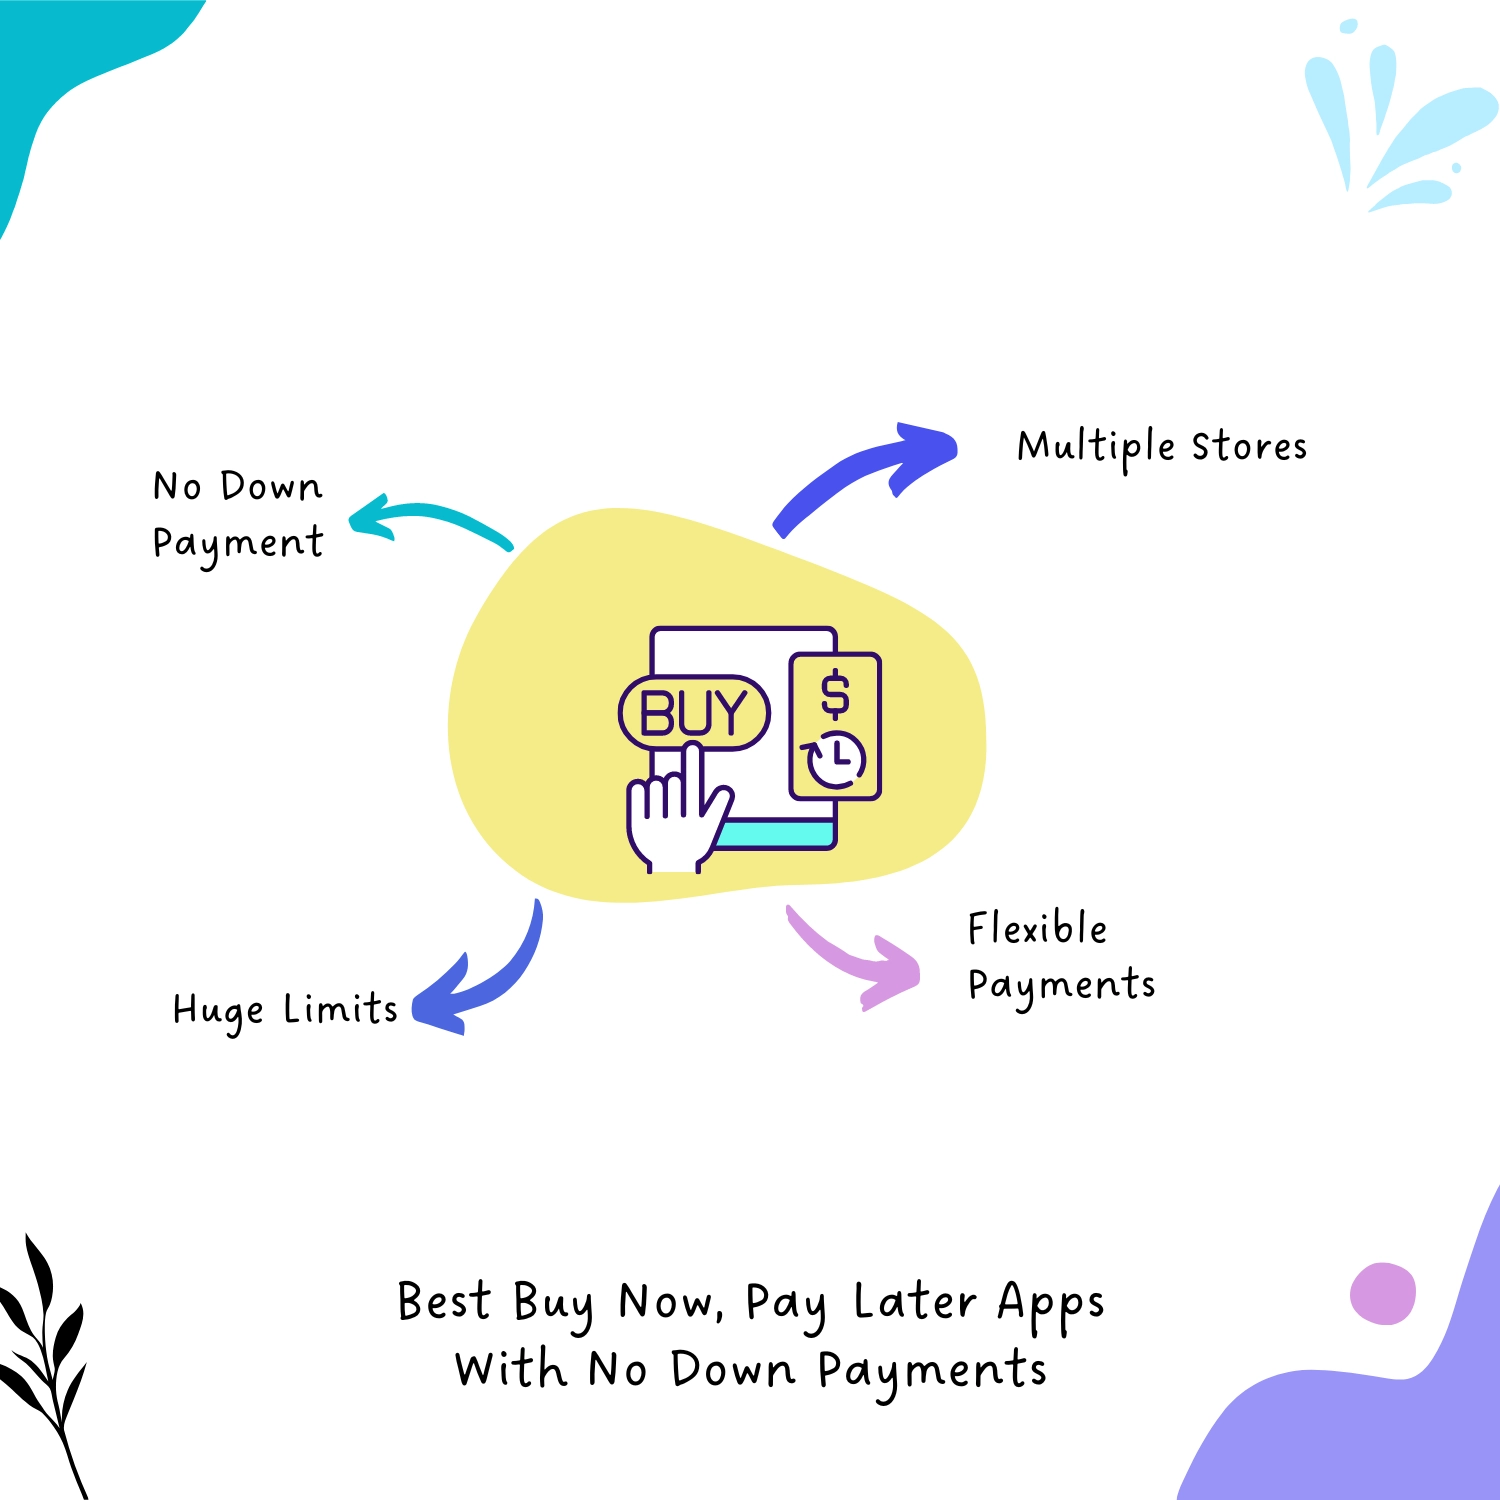 Buy Now, Pay Later Apps With No Down Payment